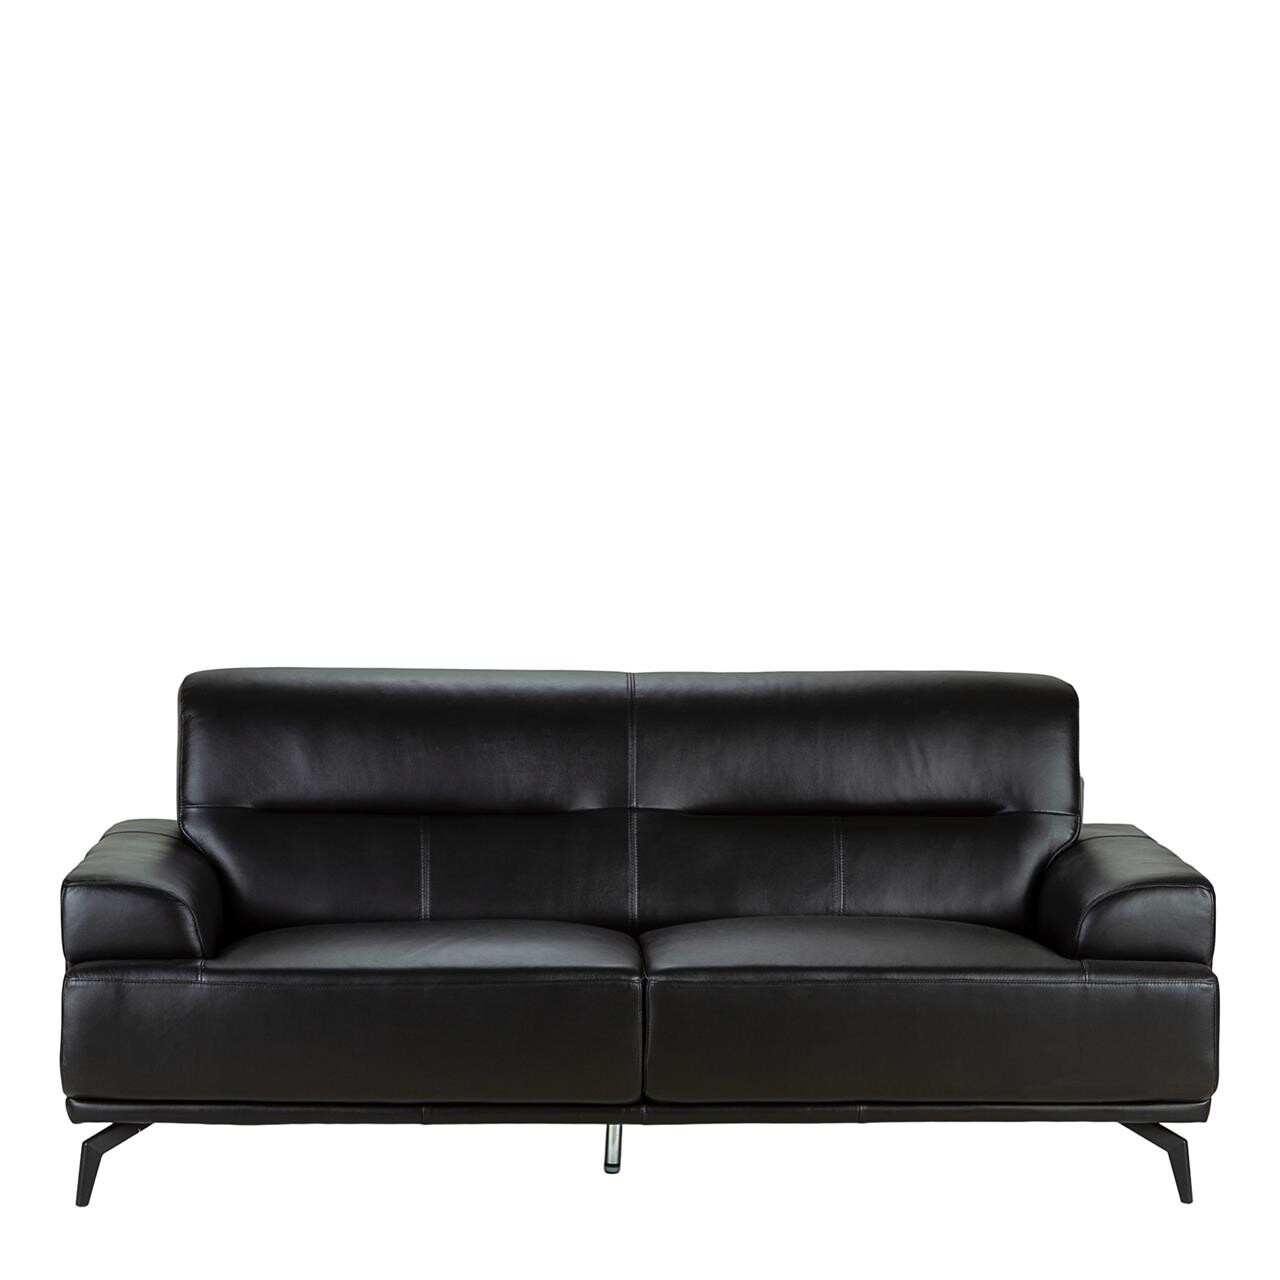 Furniture by Sinnerup NEWCASTLE 3 pers. sofa  (SORT ONESIZE)